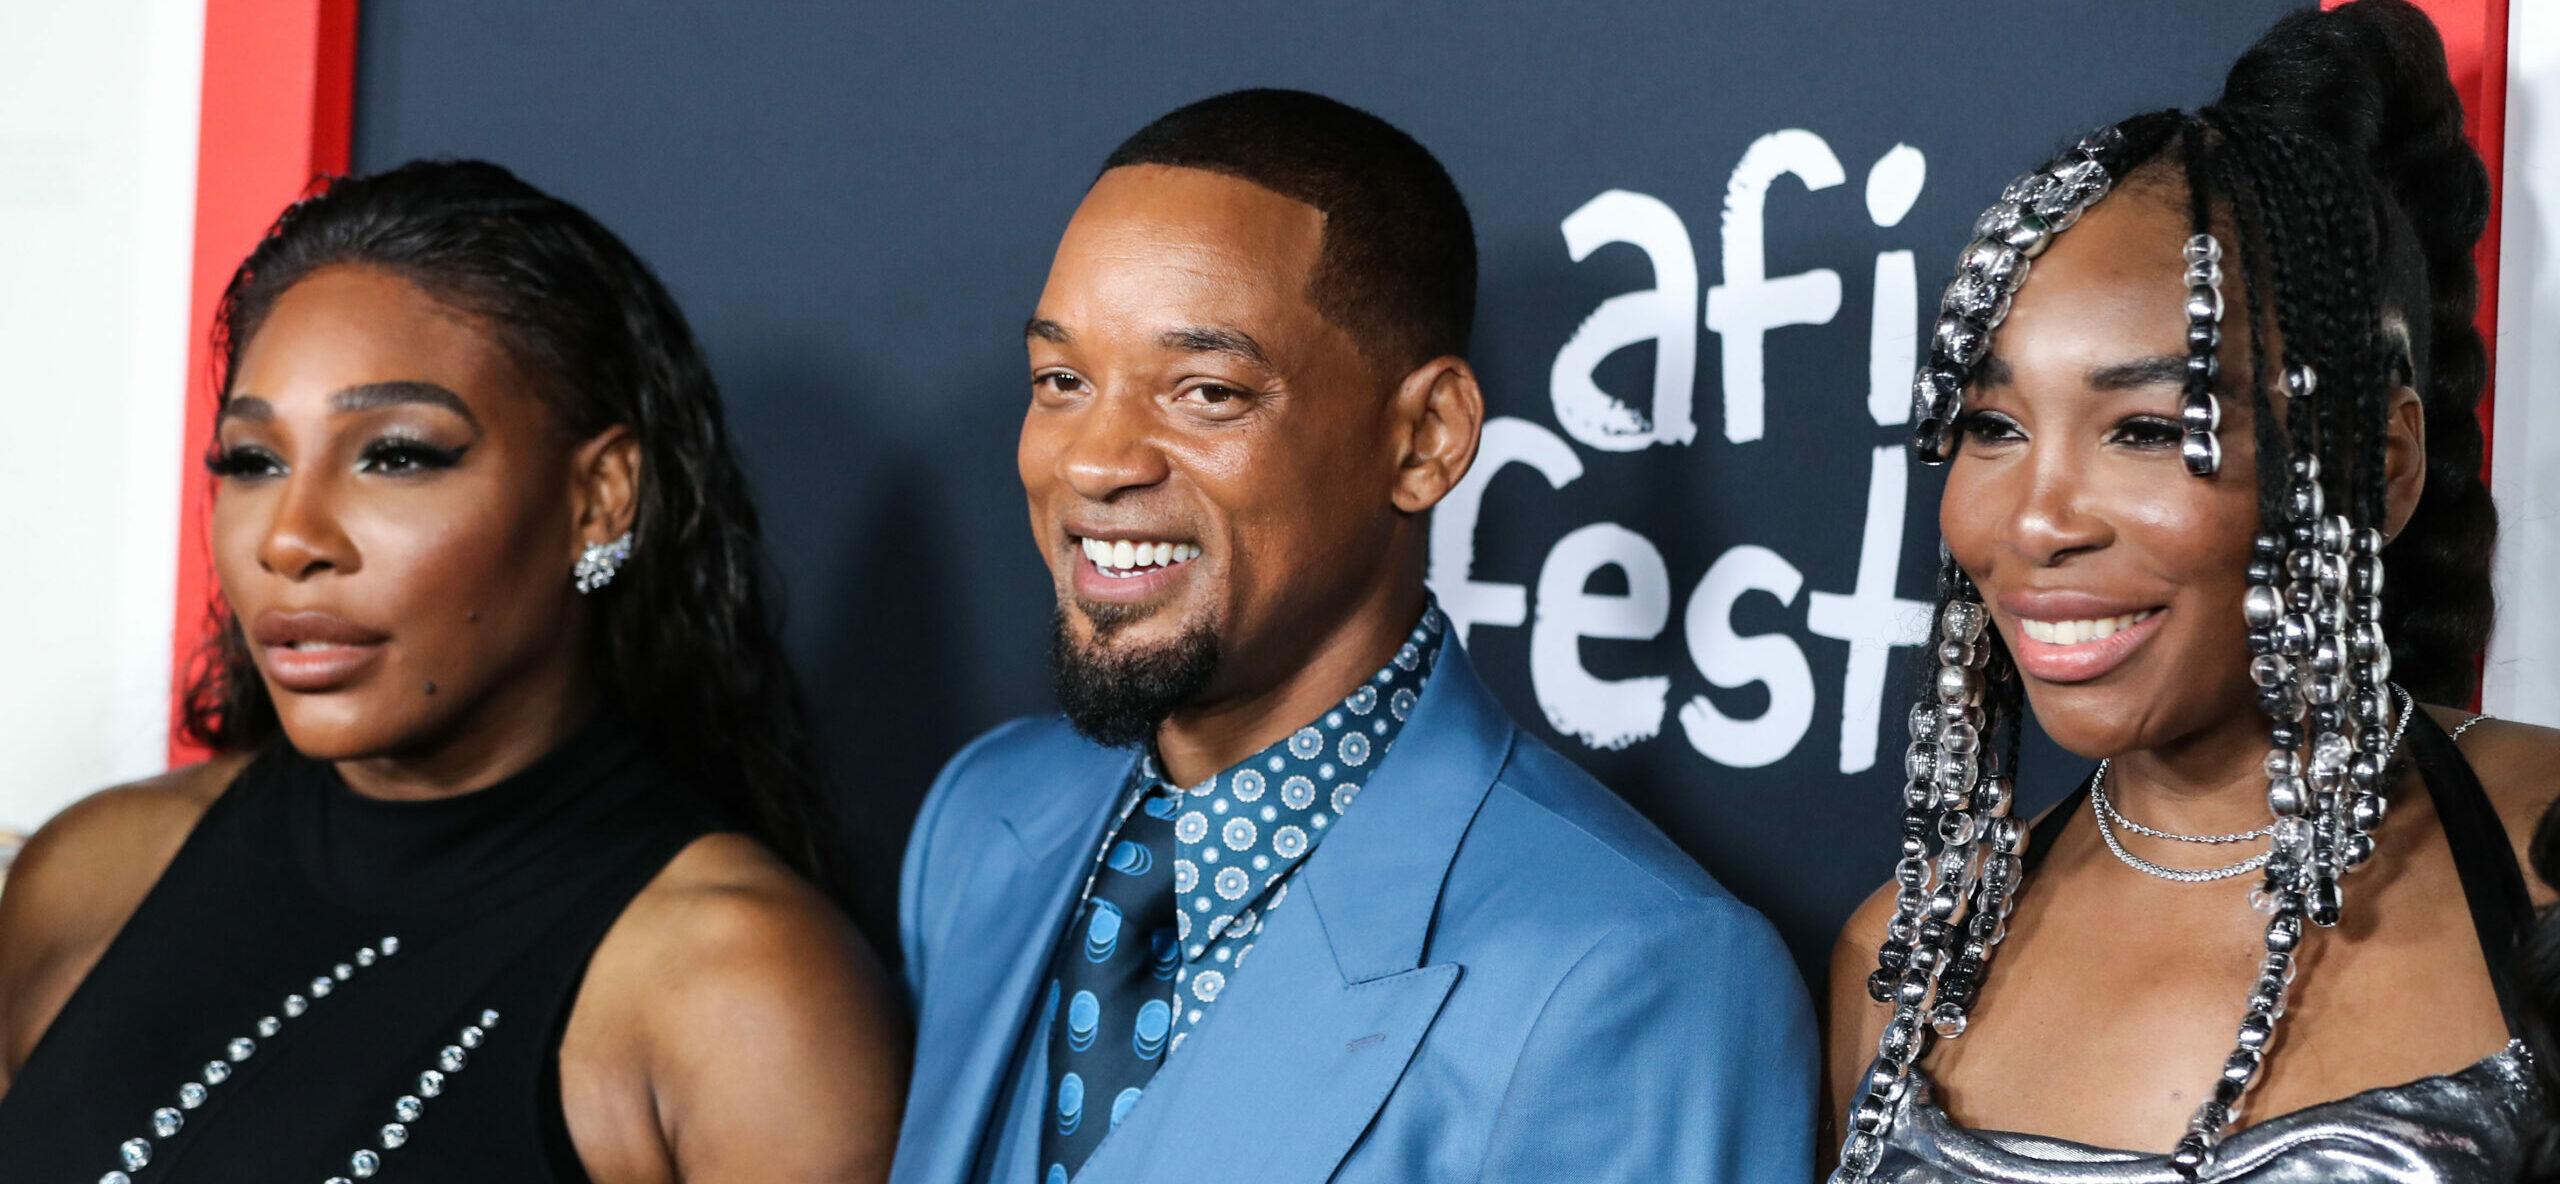 Serena Williams, Venus Williams and Will Smith at the premiere of "King Richard"